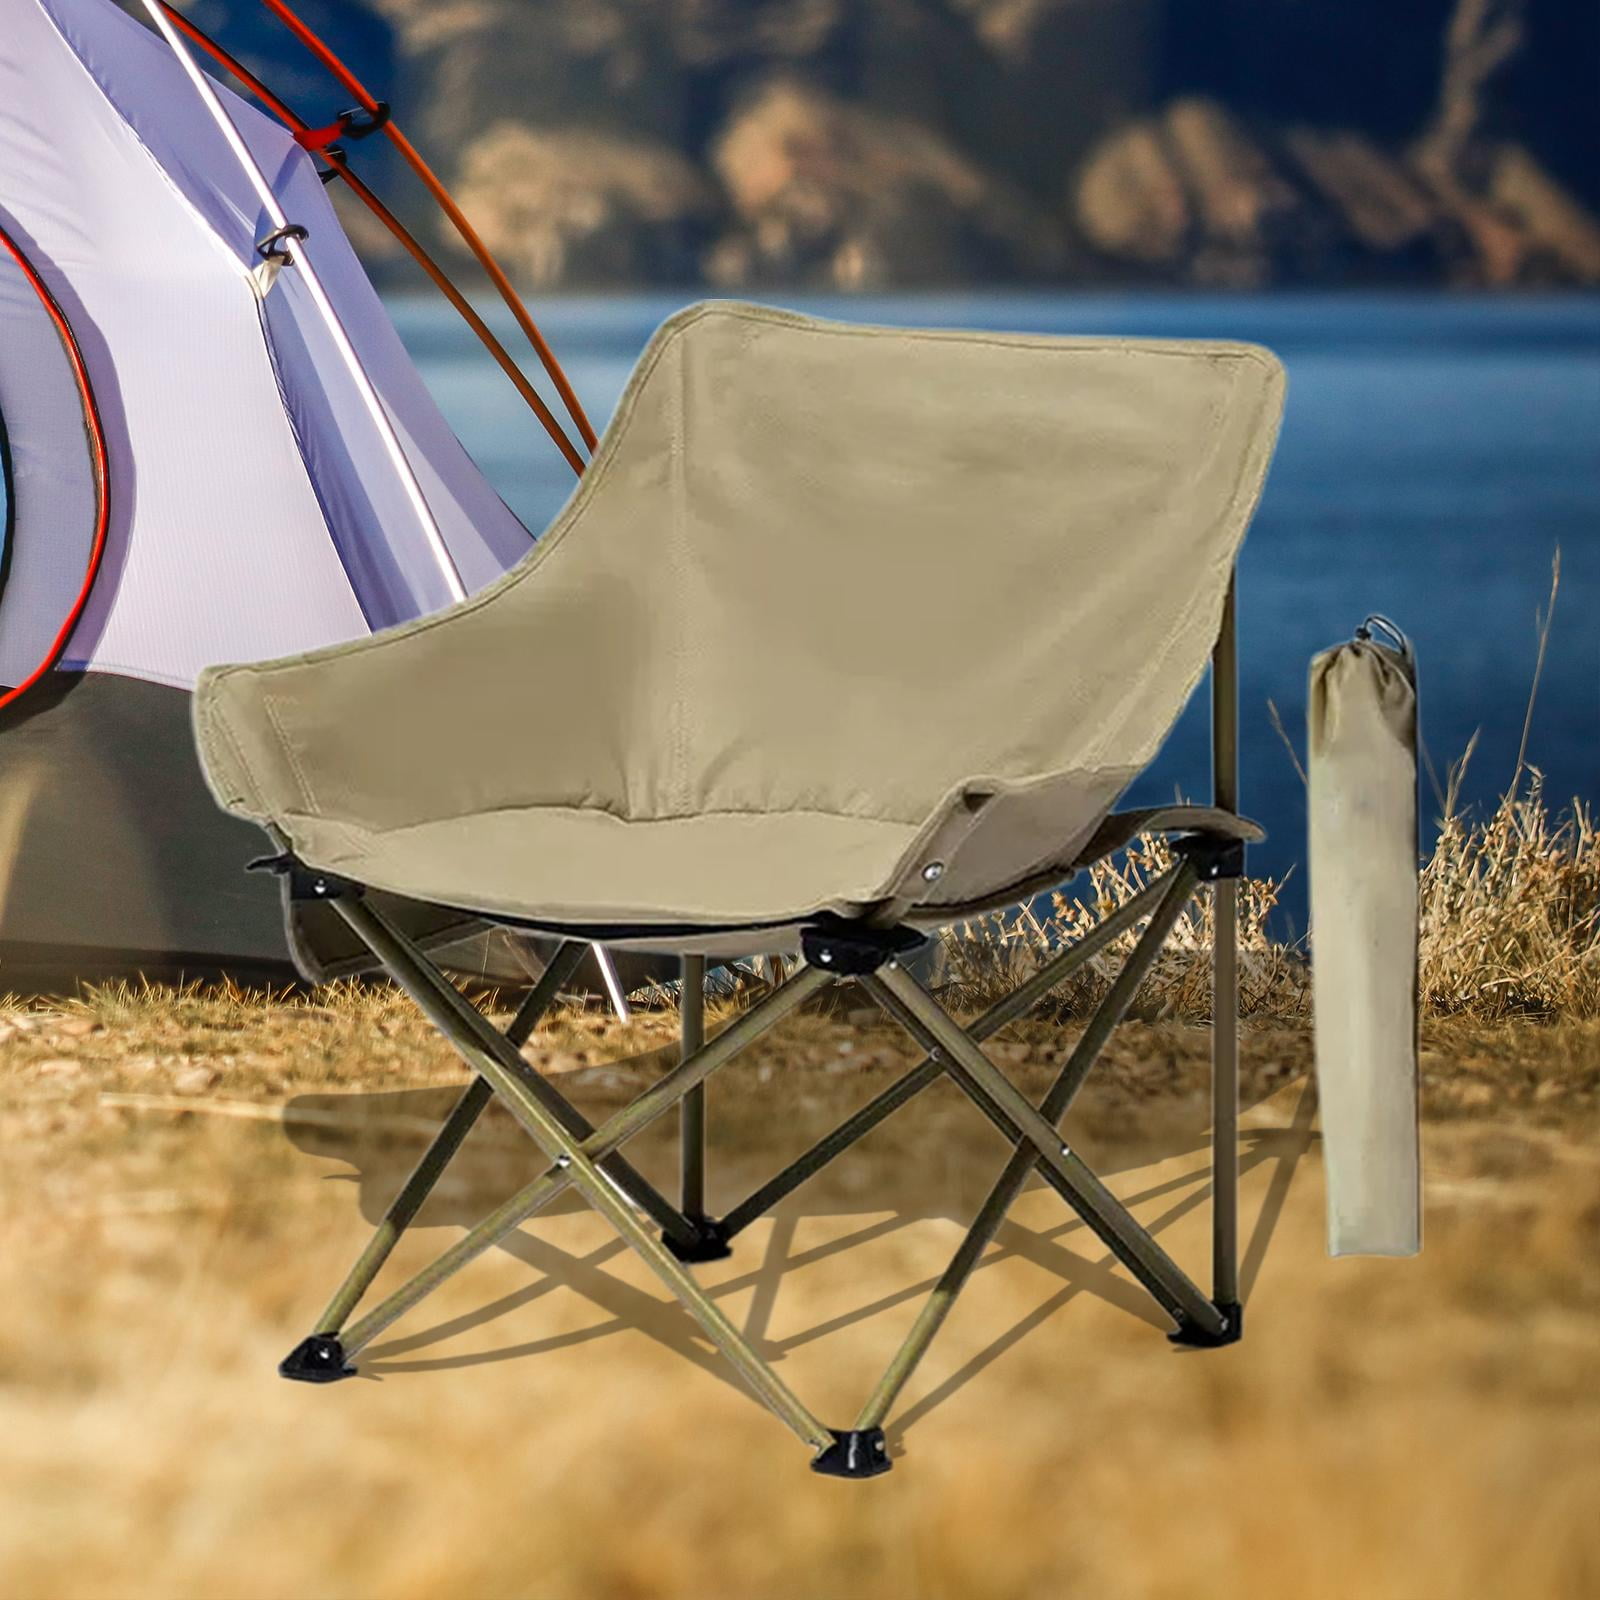 Lightweight Folding Chair Camping Stool Chair Lightweight Collapsible Beach  Chair Folding Camping Chair for Backpacking Fishing Sports Beach White 